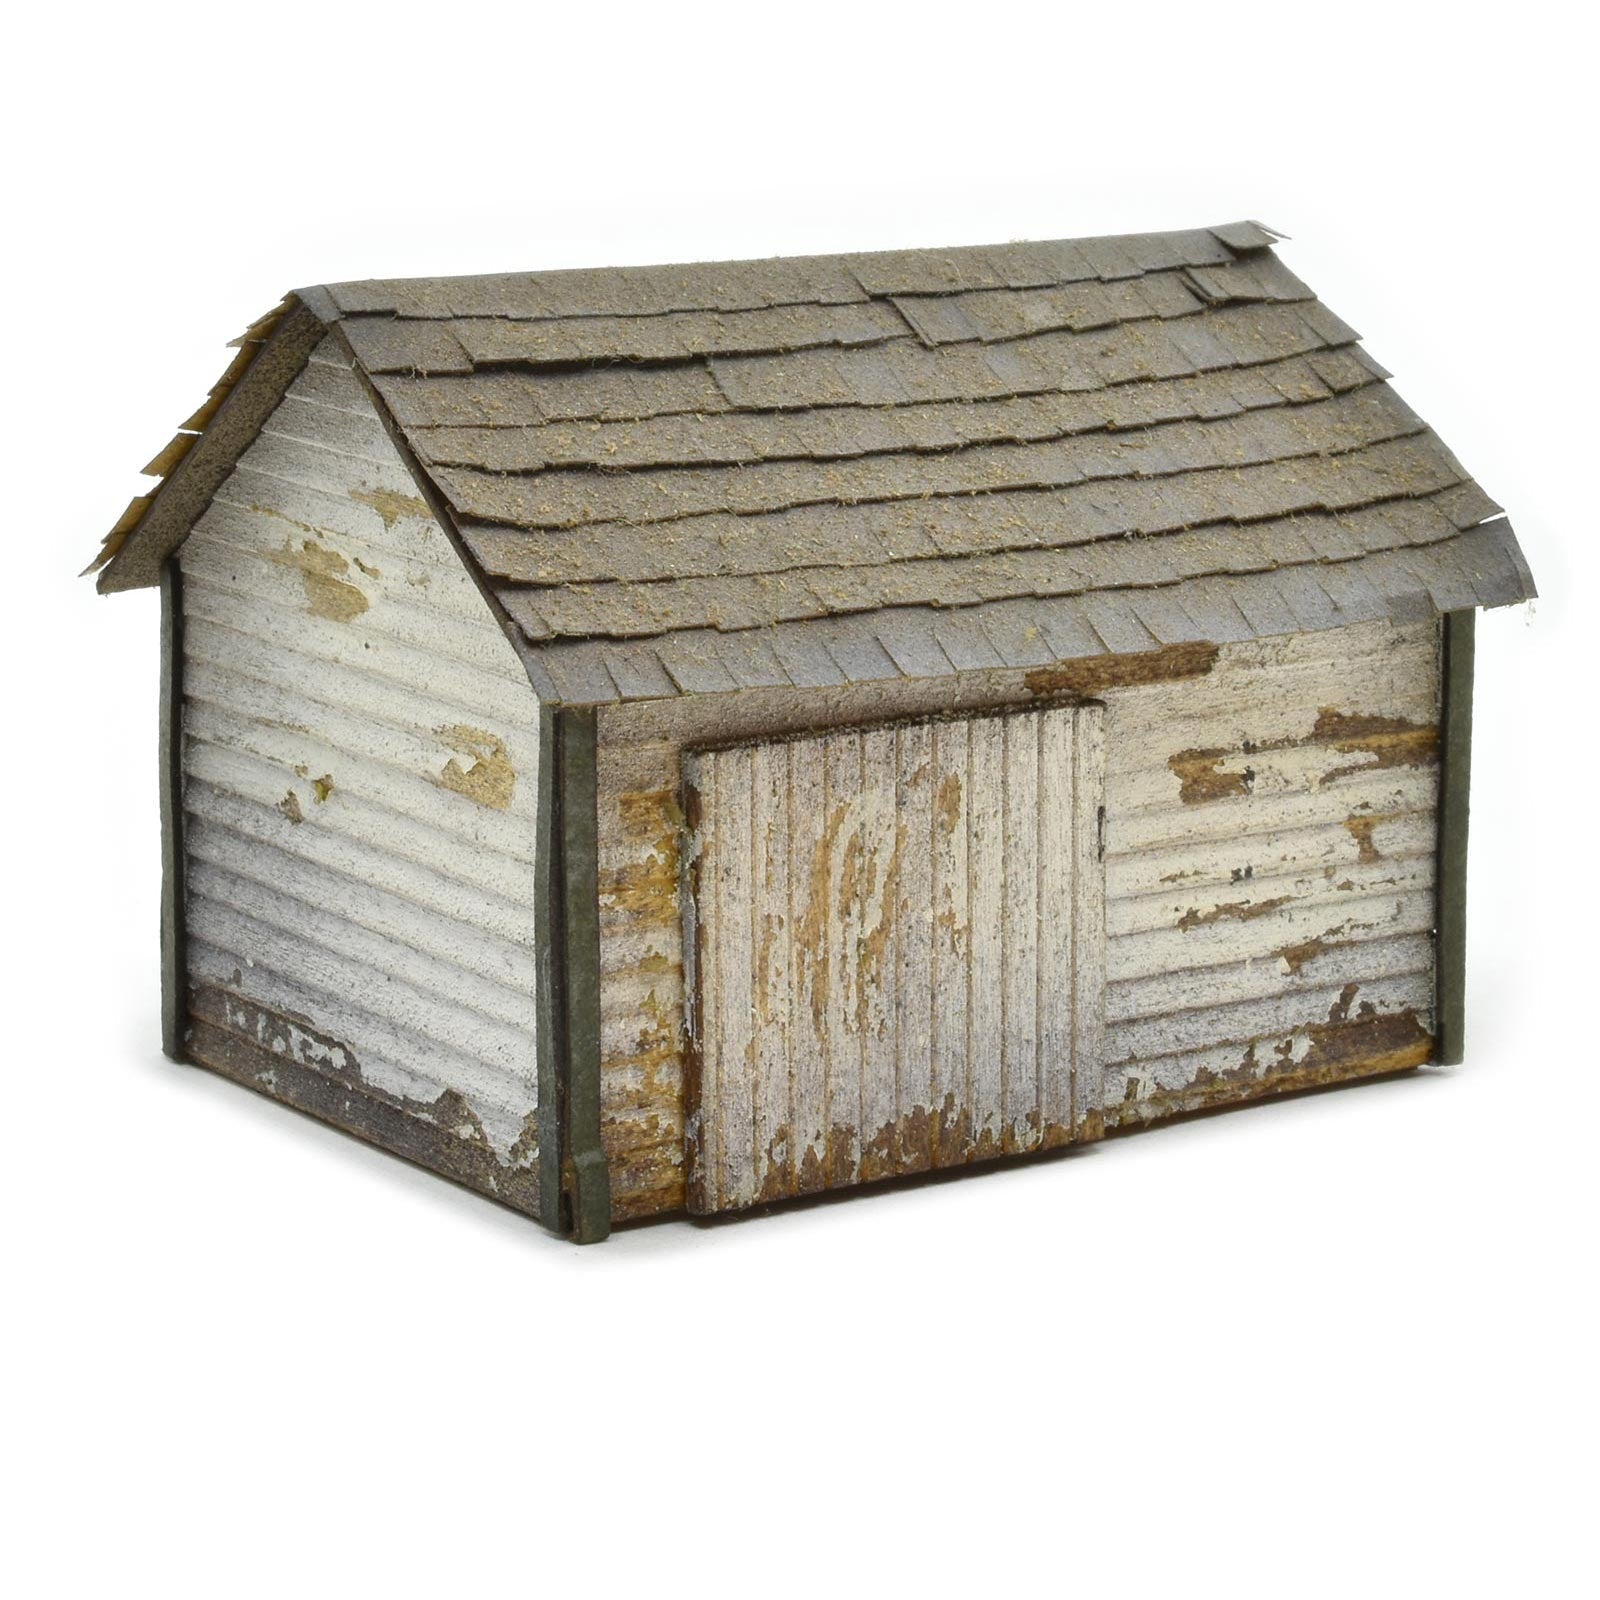 Rural Workshop Tool Shed Kit, HO Scale, By Scientific